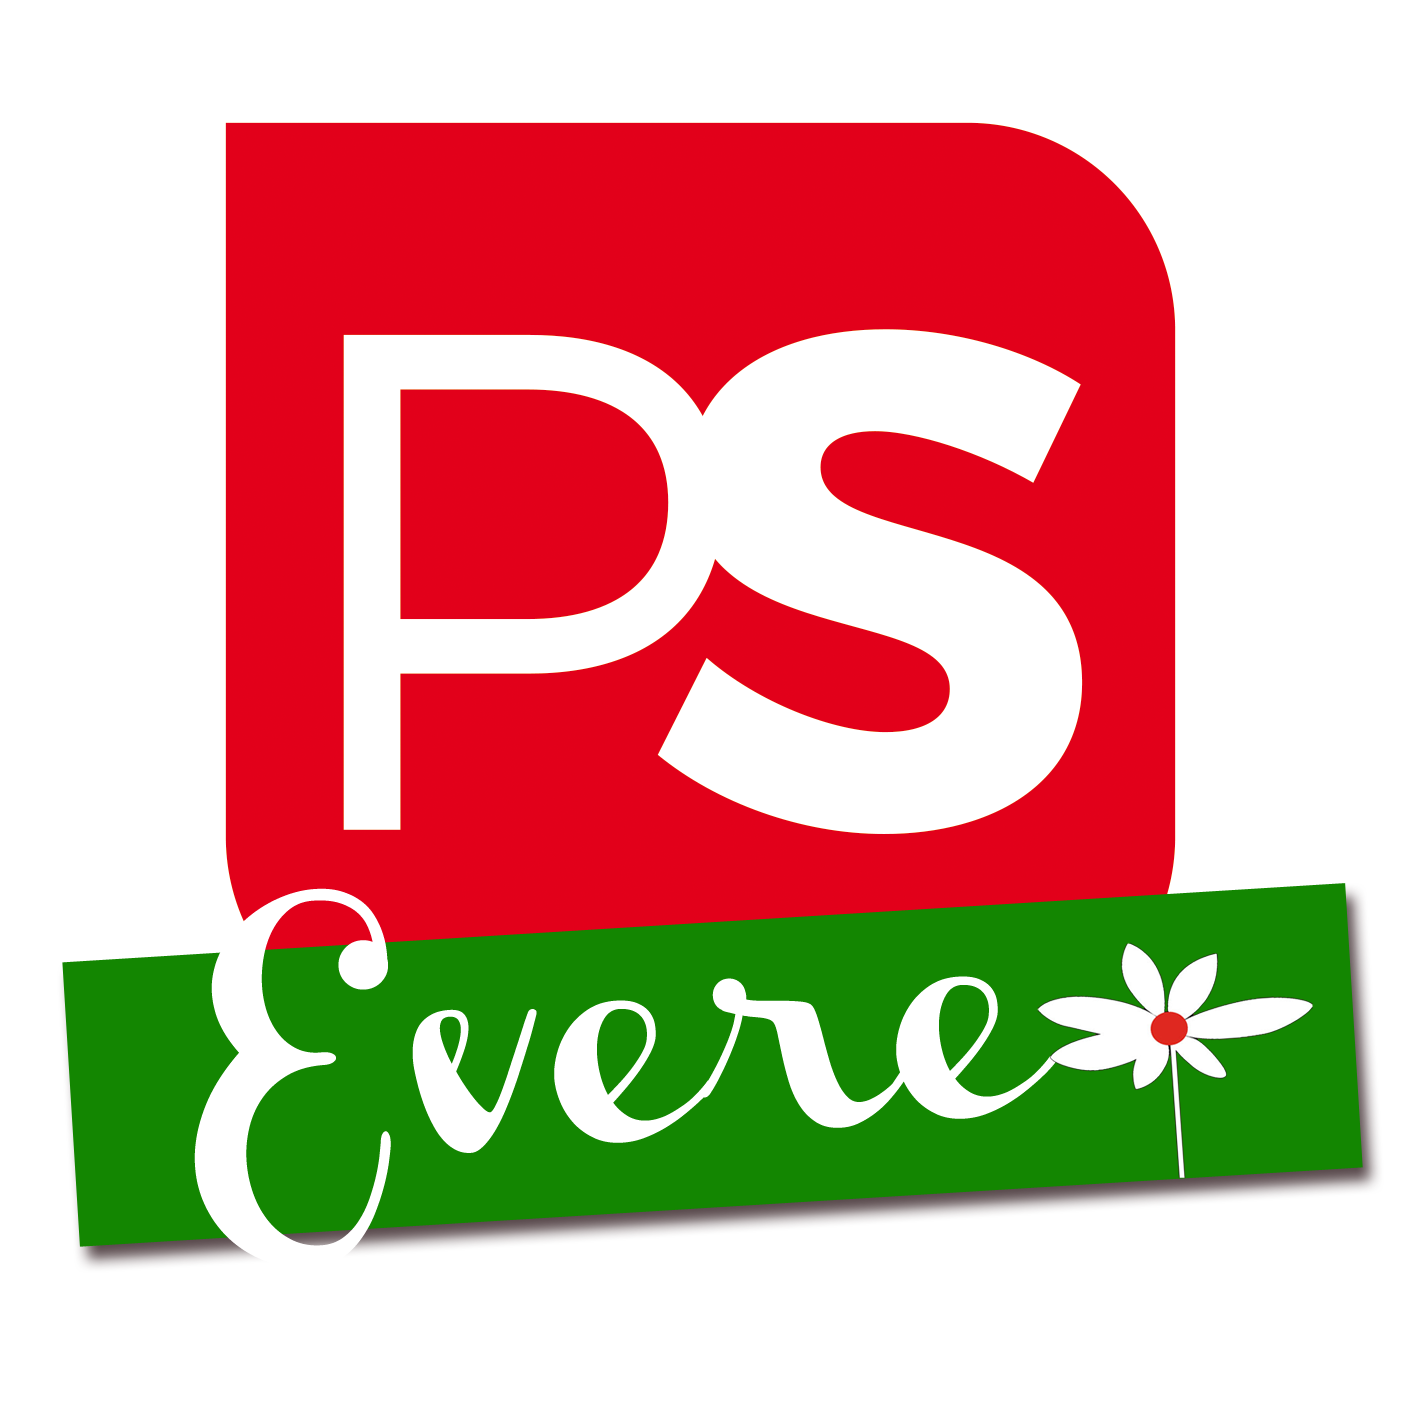 PS Evere